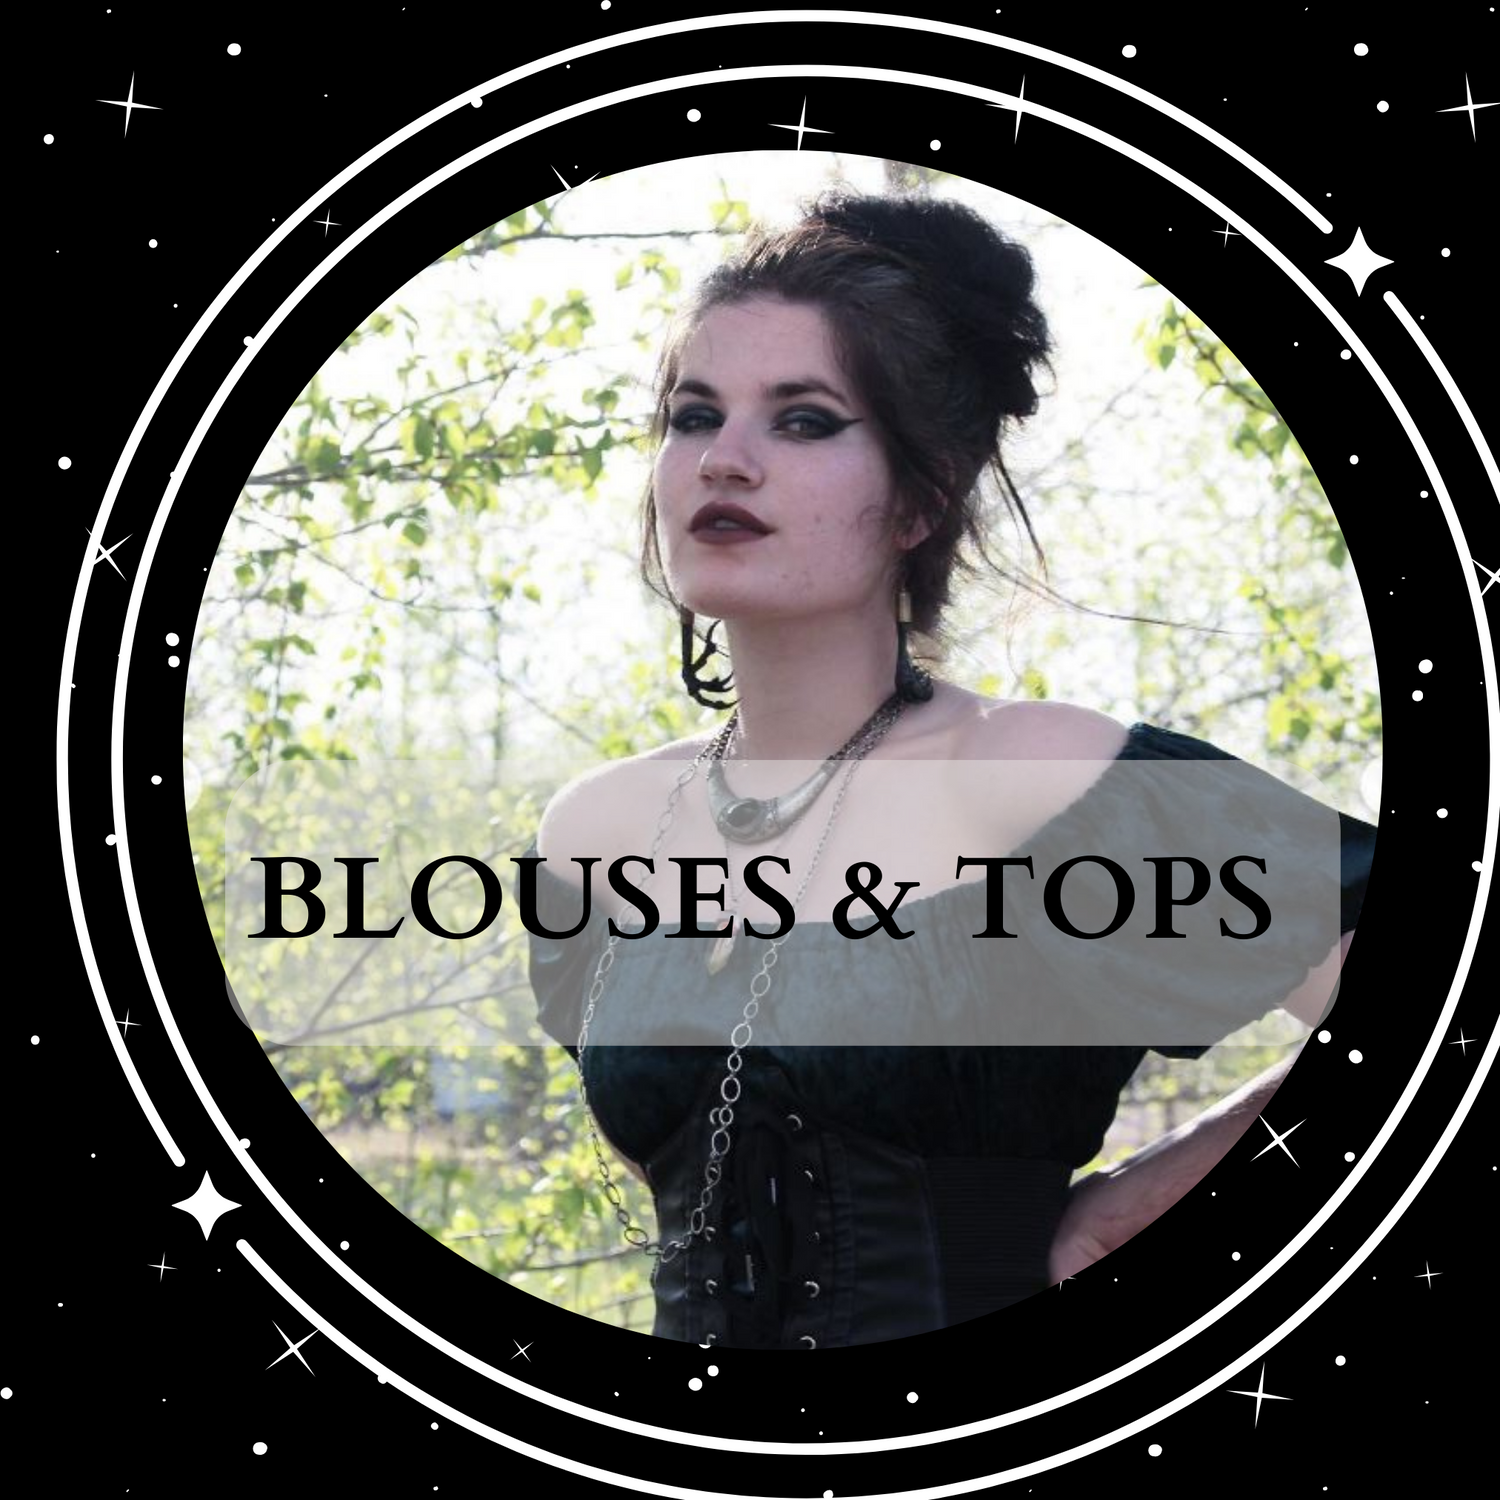 Blouses & Tops